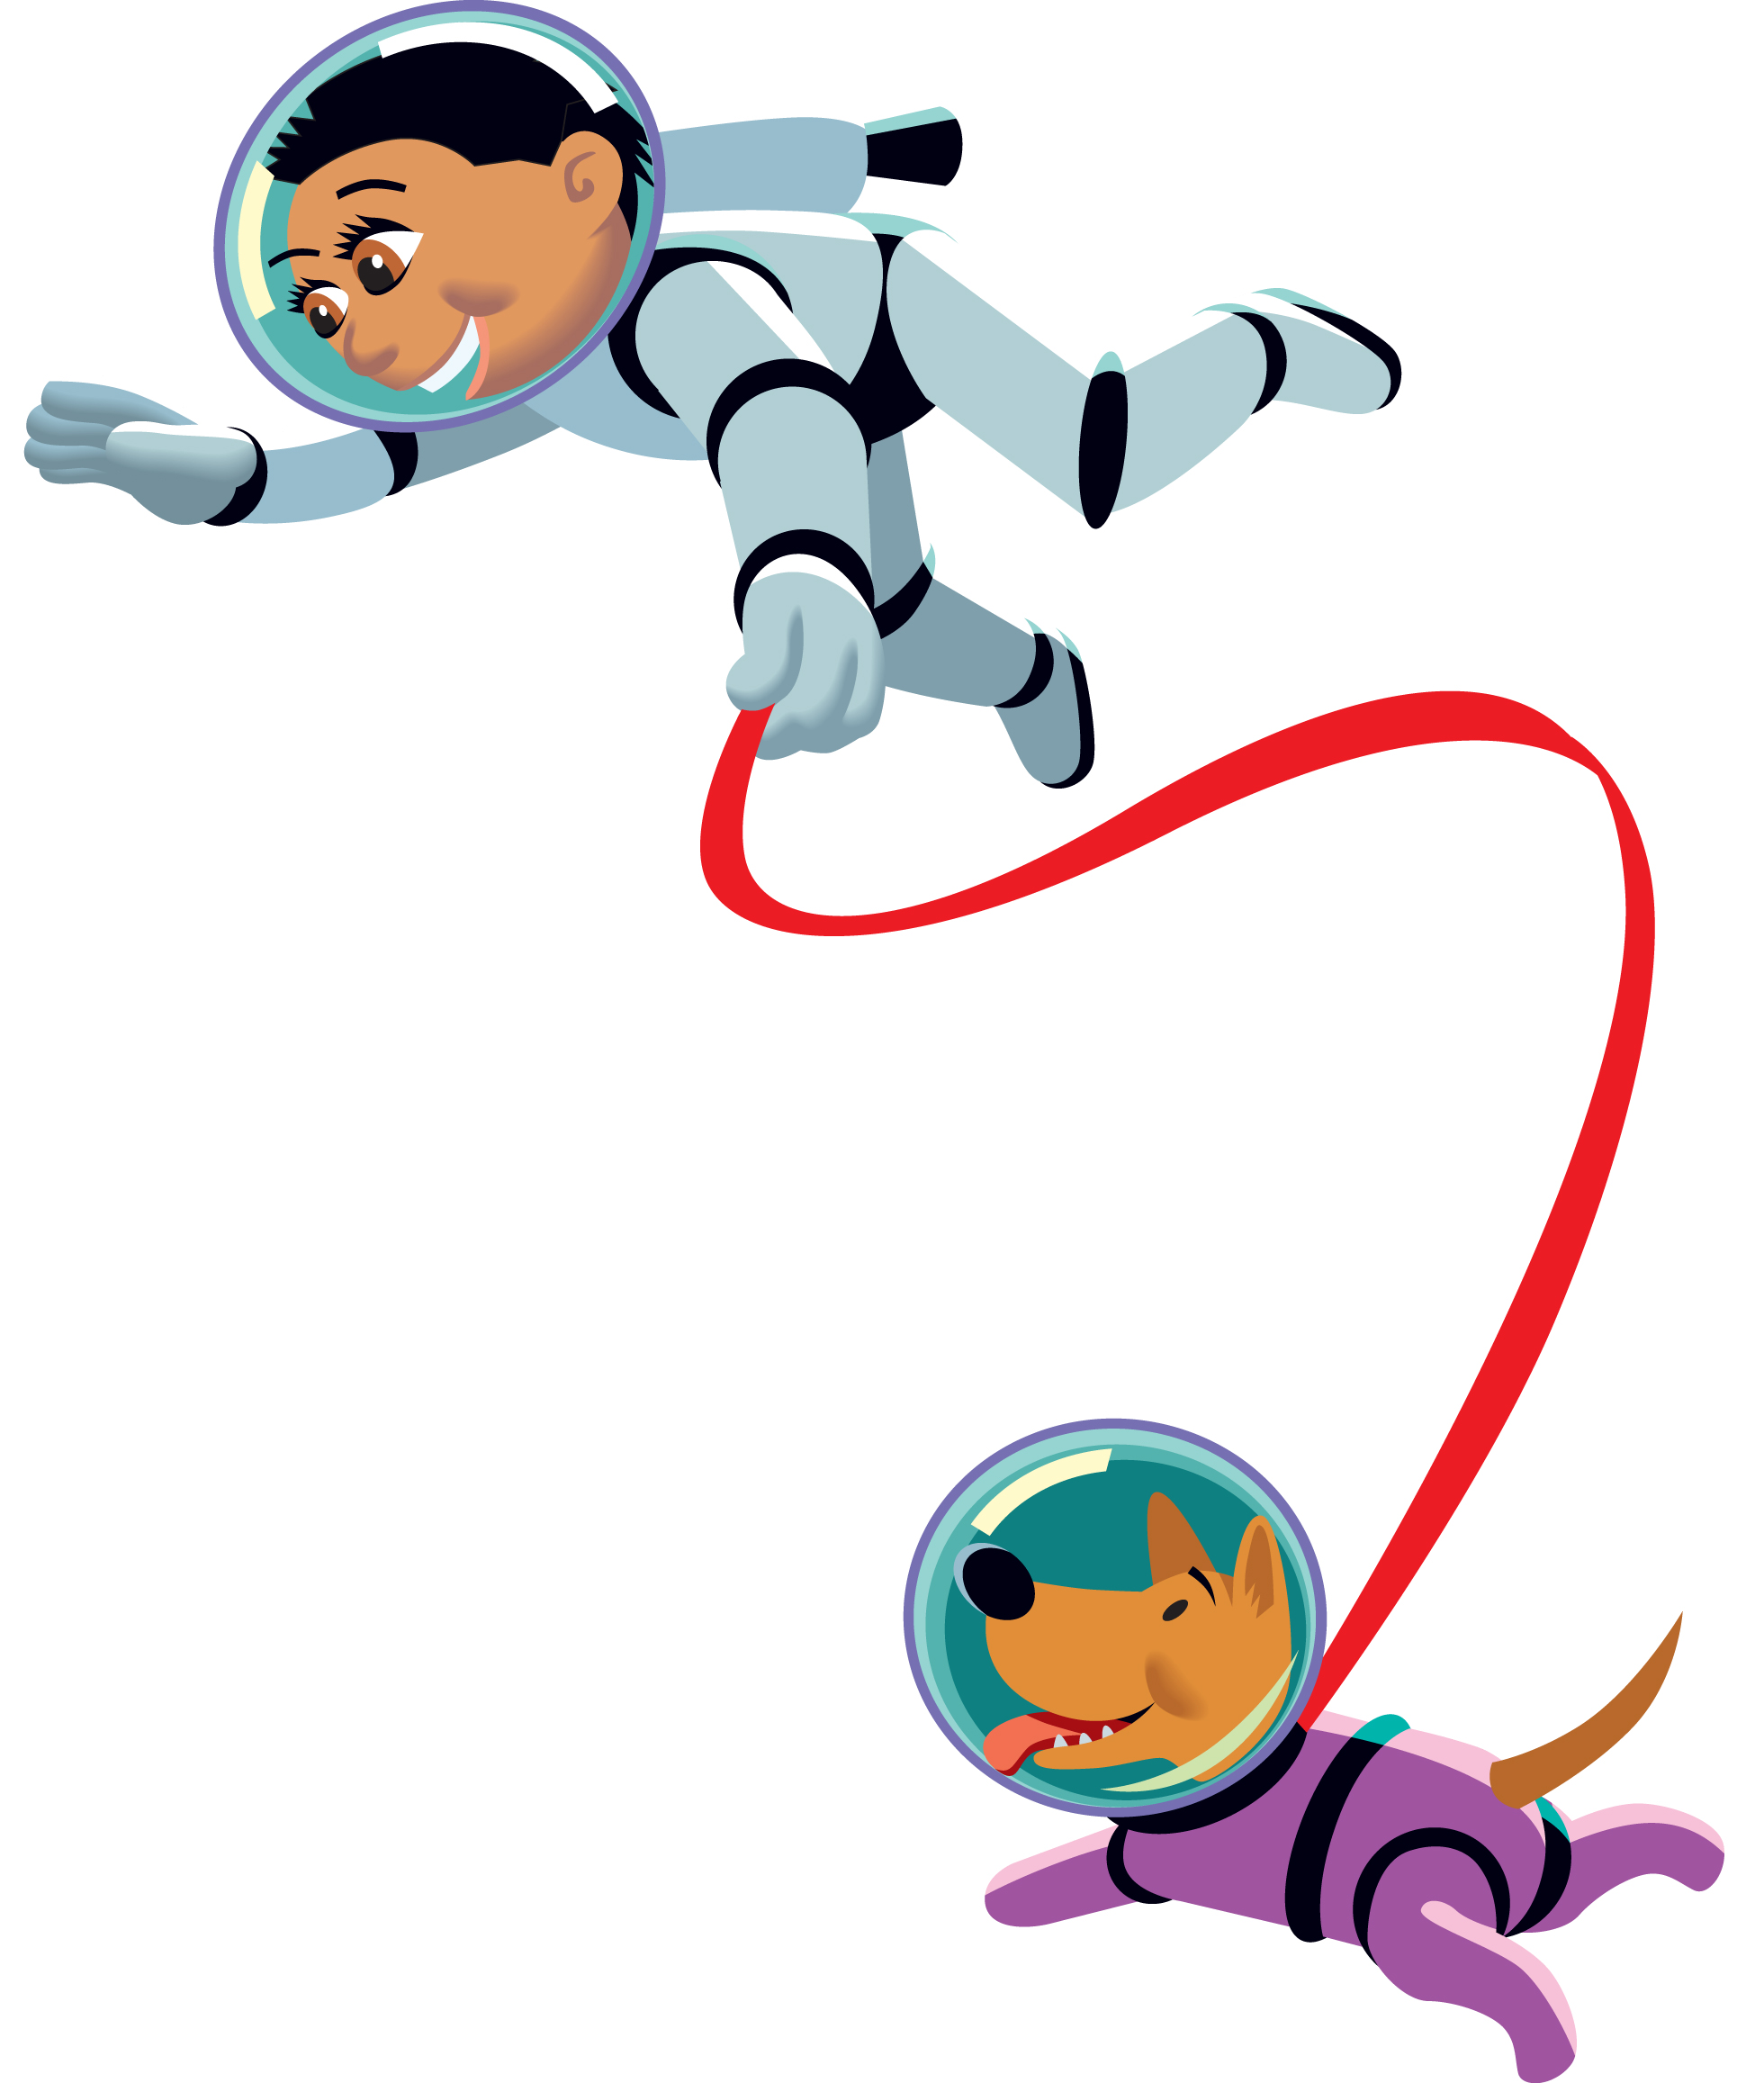 space age clipart - photo #16